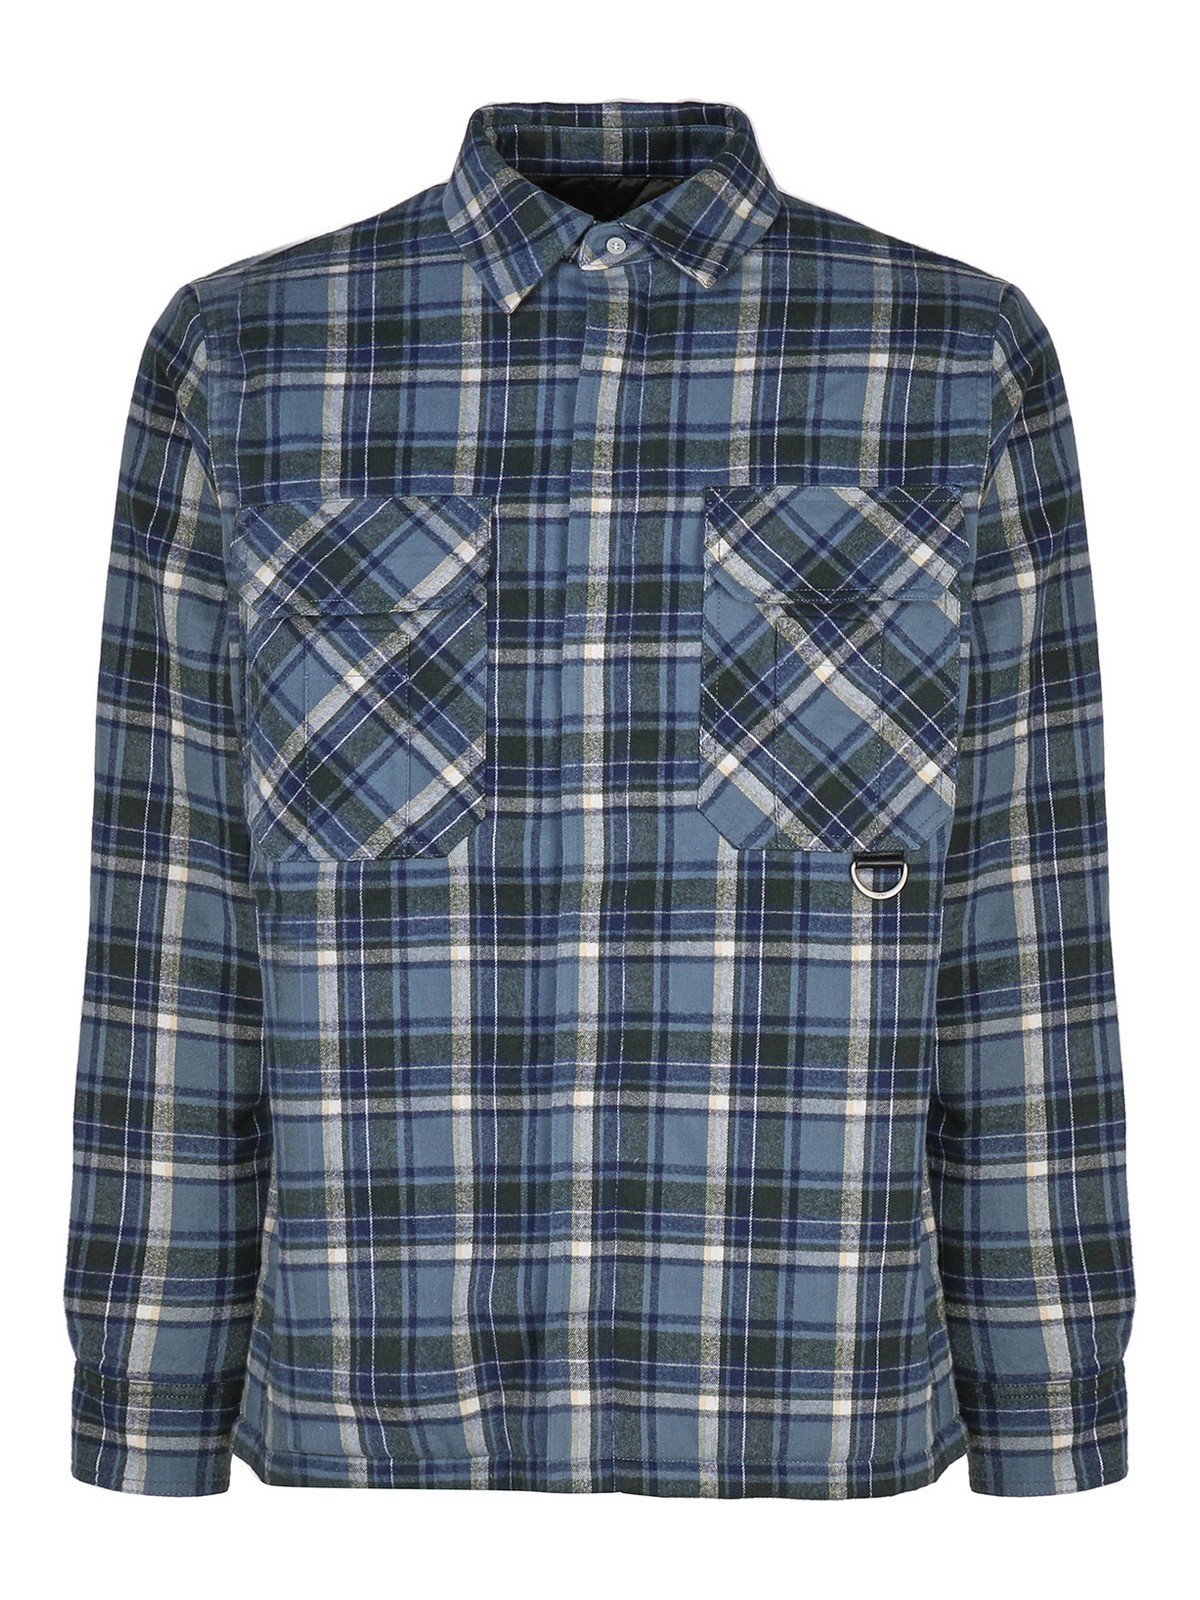 LOEWE CHECK SHIRT WITH FRONT POCKETS